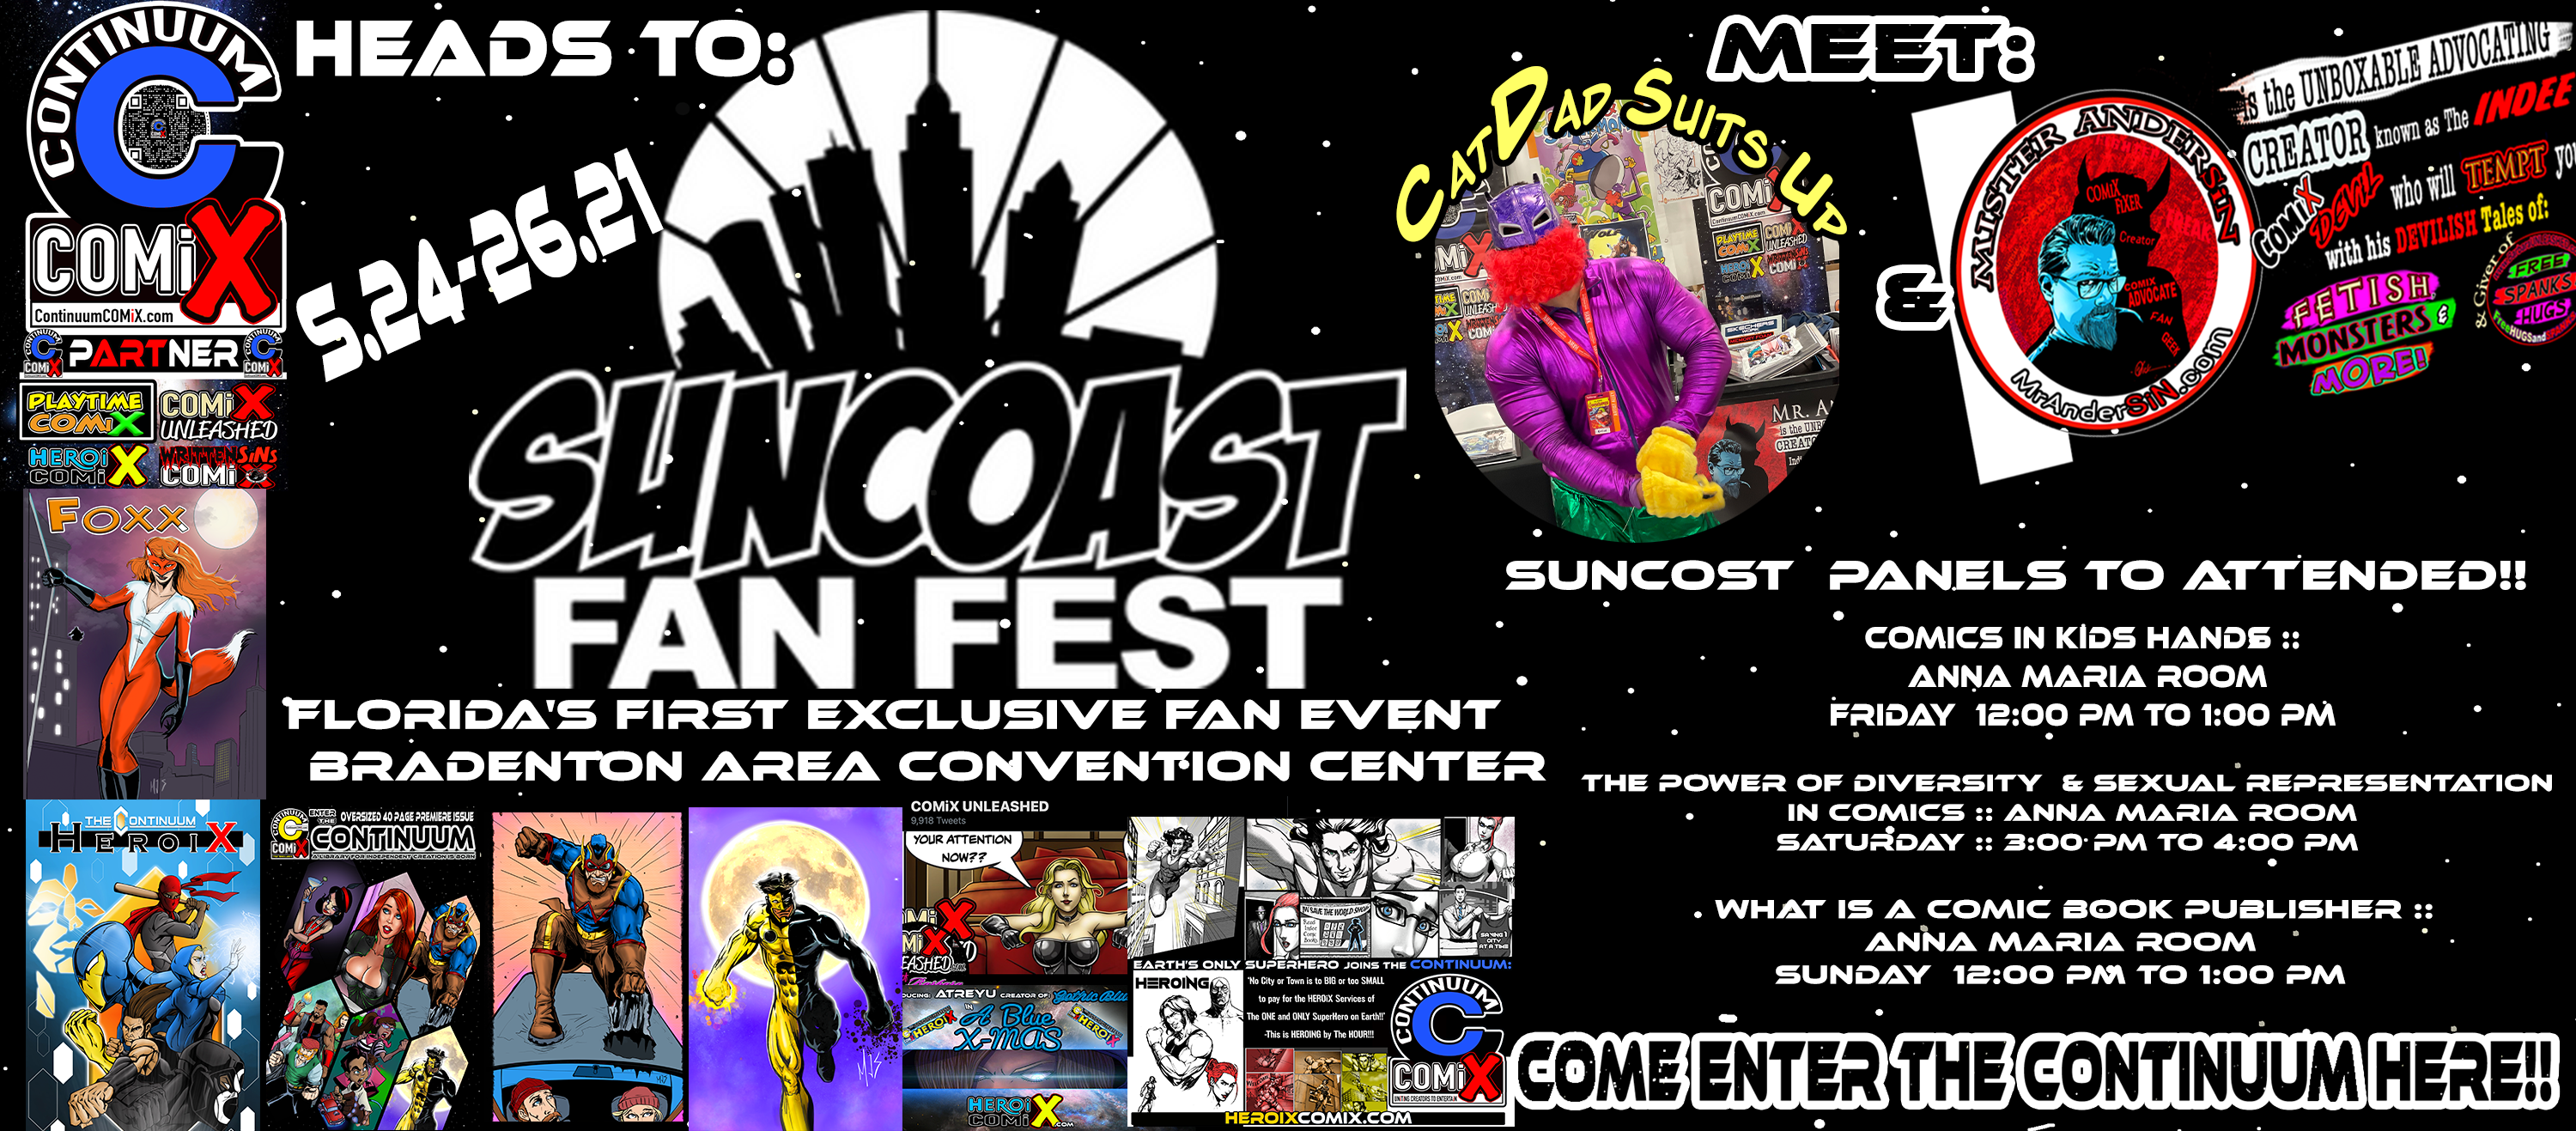 COMiX DEViL & CatDad head ro SUNCOAST in FL and more -The COMiXcon ForeCast WEEK 38 –